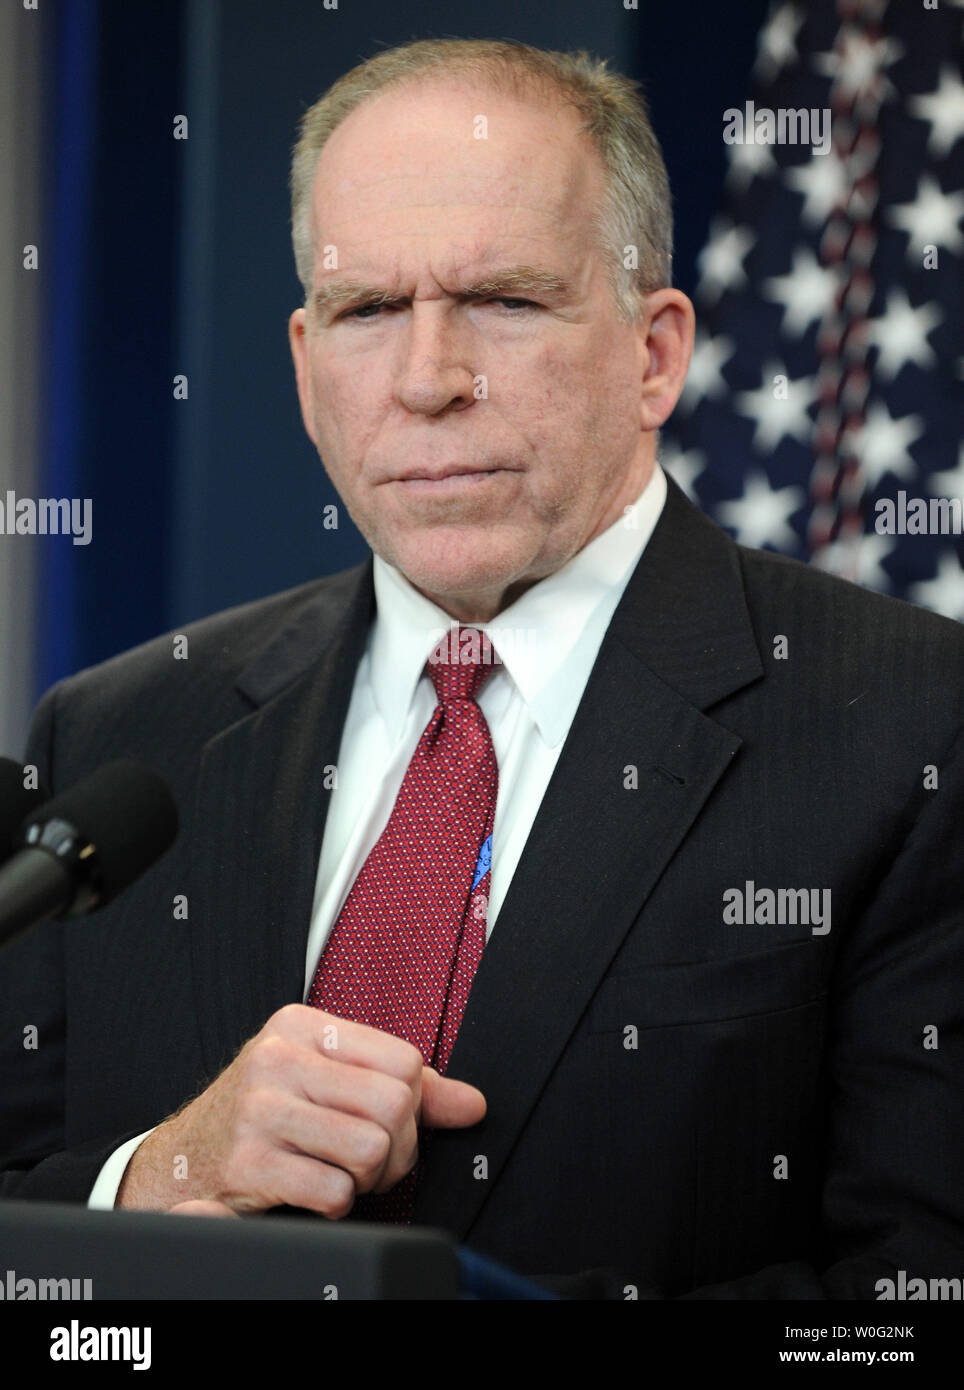 Assistant to the President for Homeland Security and Counterterrorism John Brennan discusses bomb material found on cargo planes in the Brady Press Briefing Room of the White House in Washington on October 29, 2010.       UPI/Roger L. Wollenberg Stock Photo